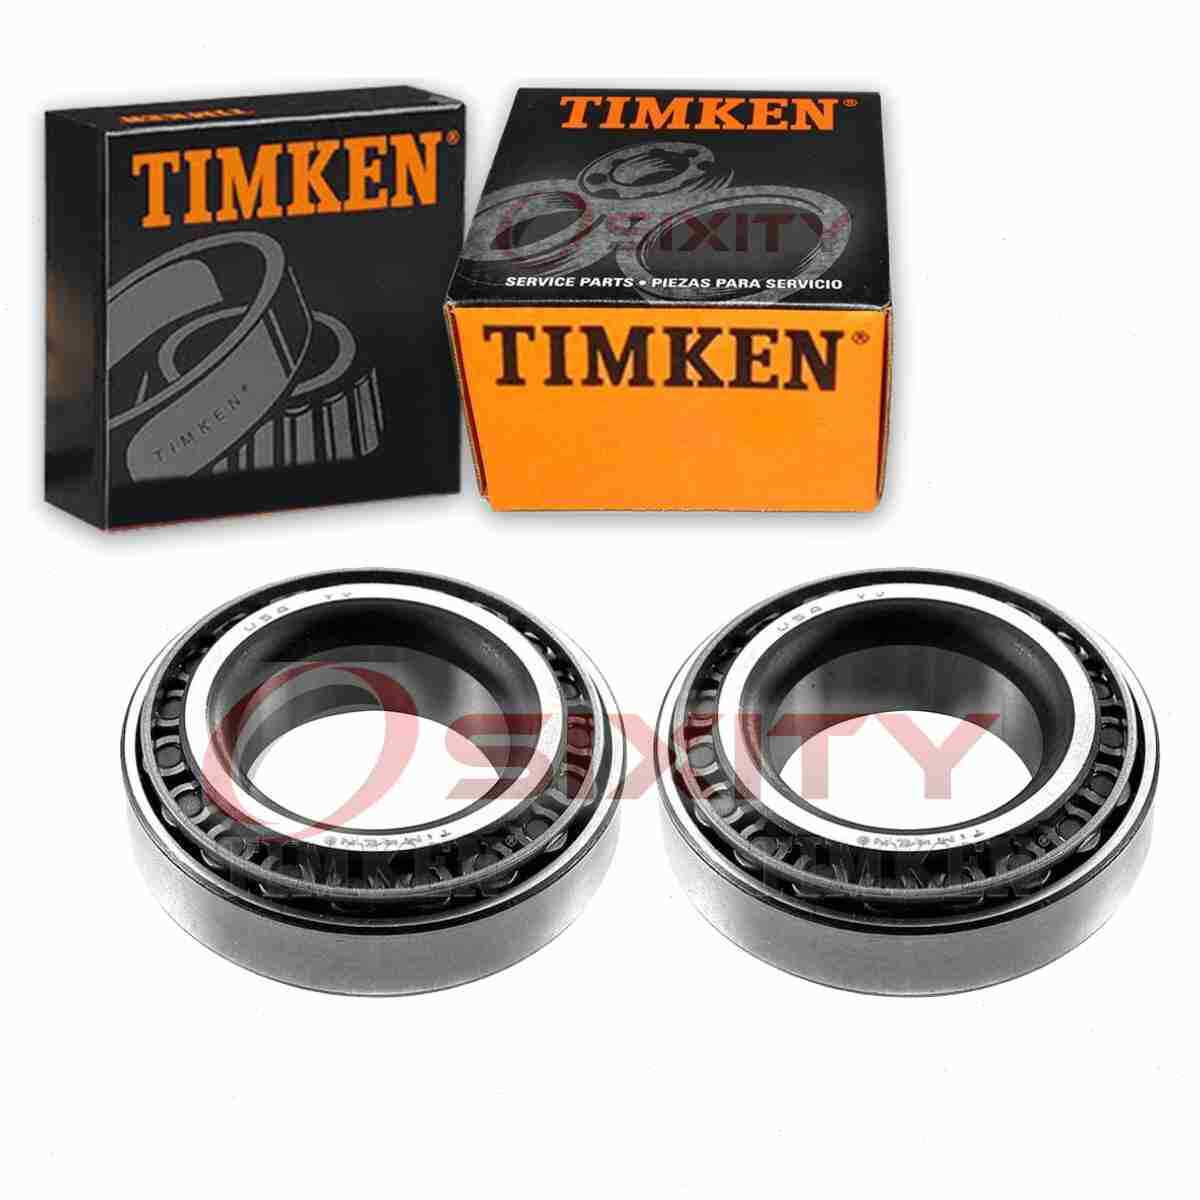 2 pc Timken Front Inner Wheel Bearing and Race Sets for 1962-1974 Chevrolet kz